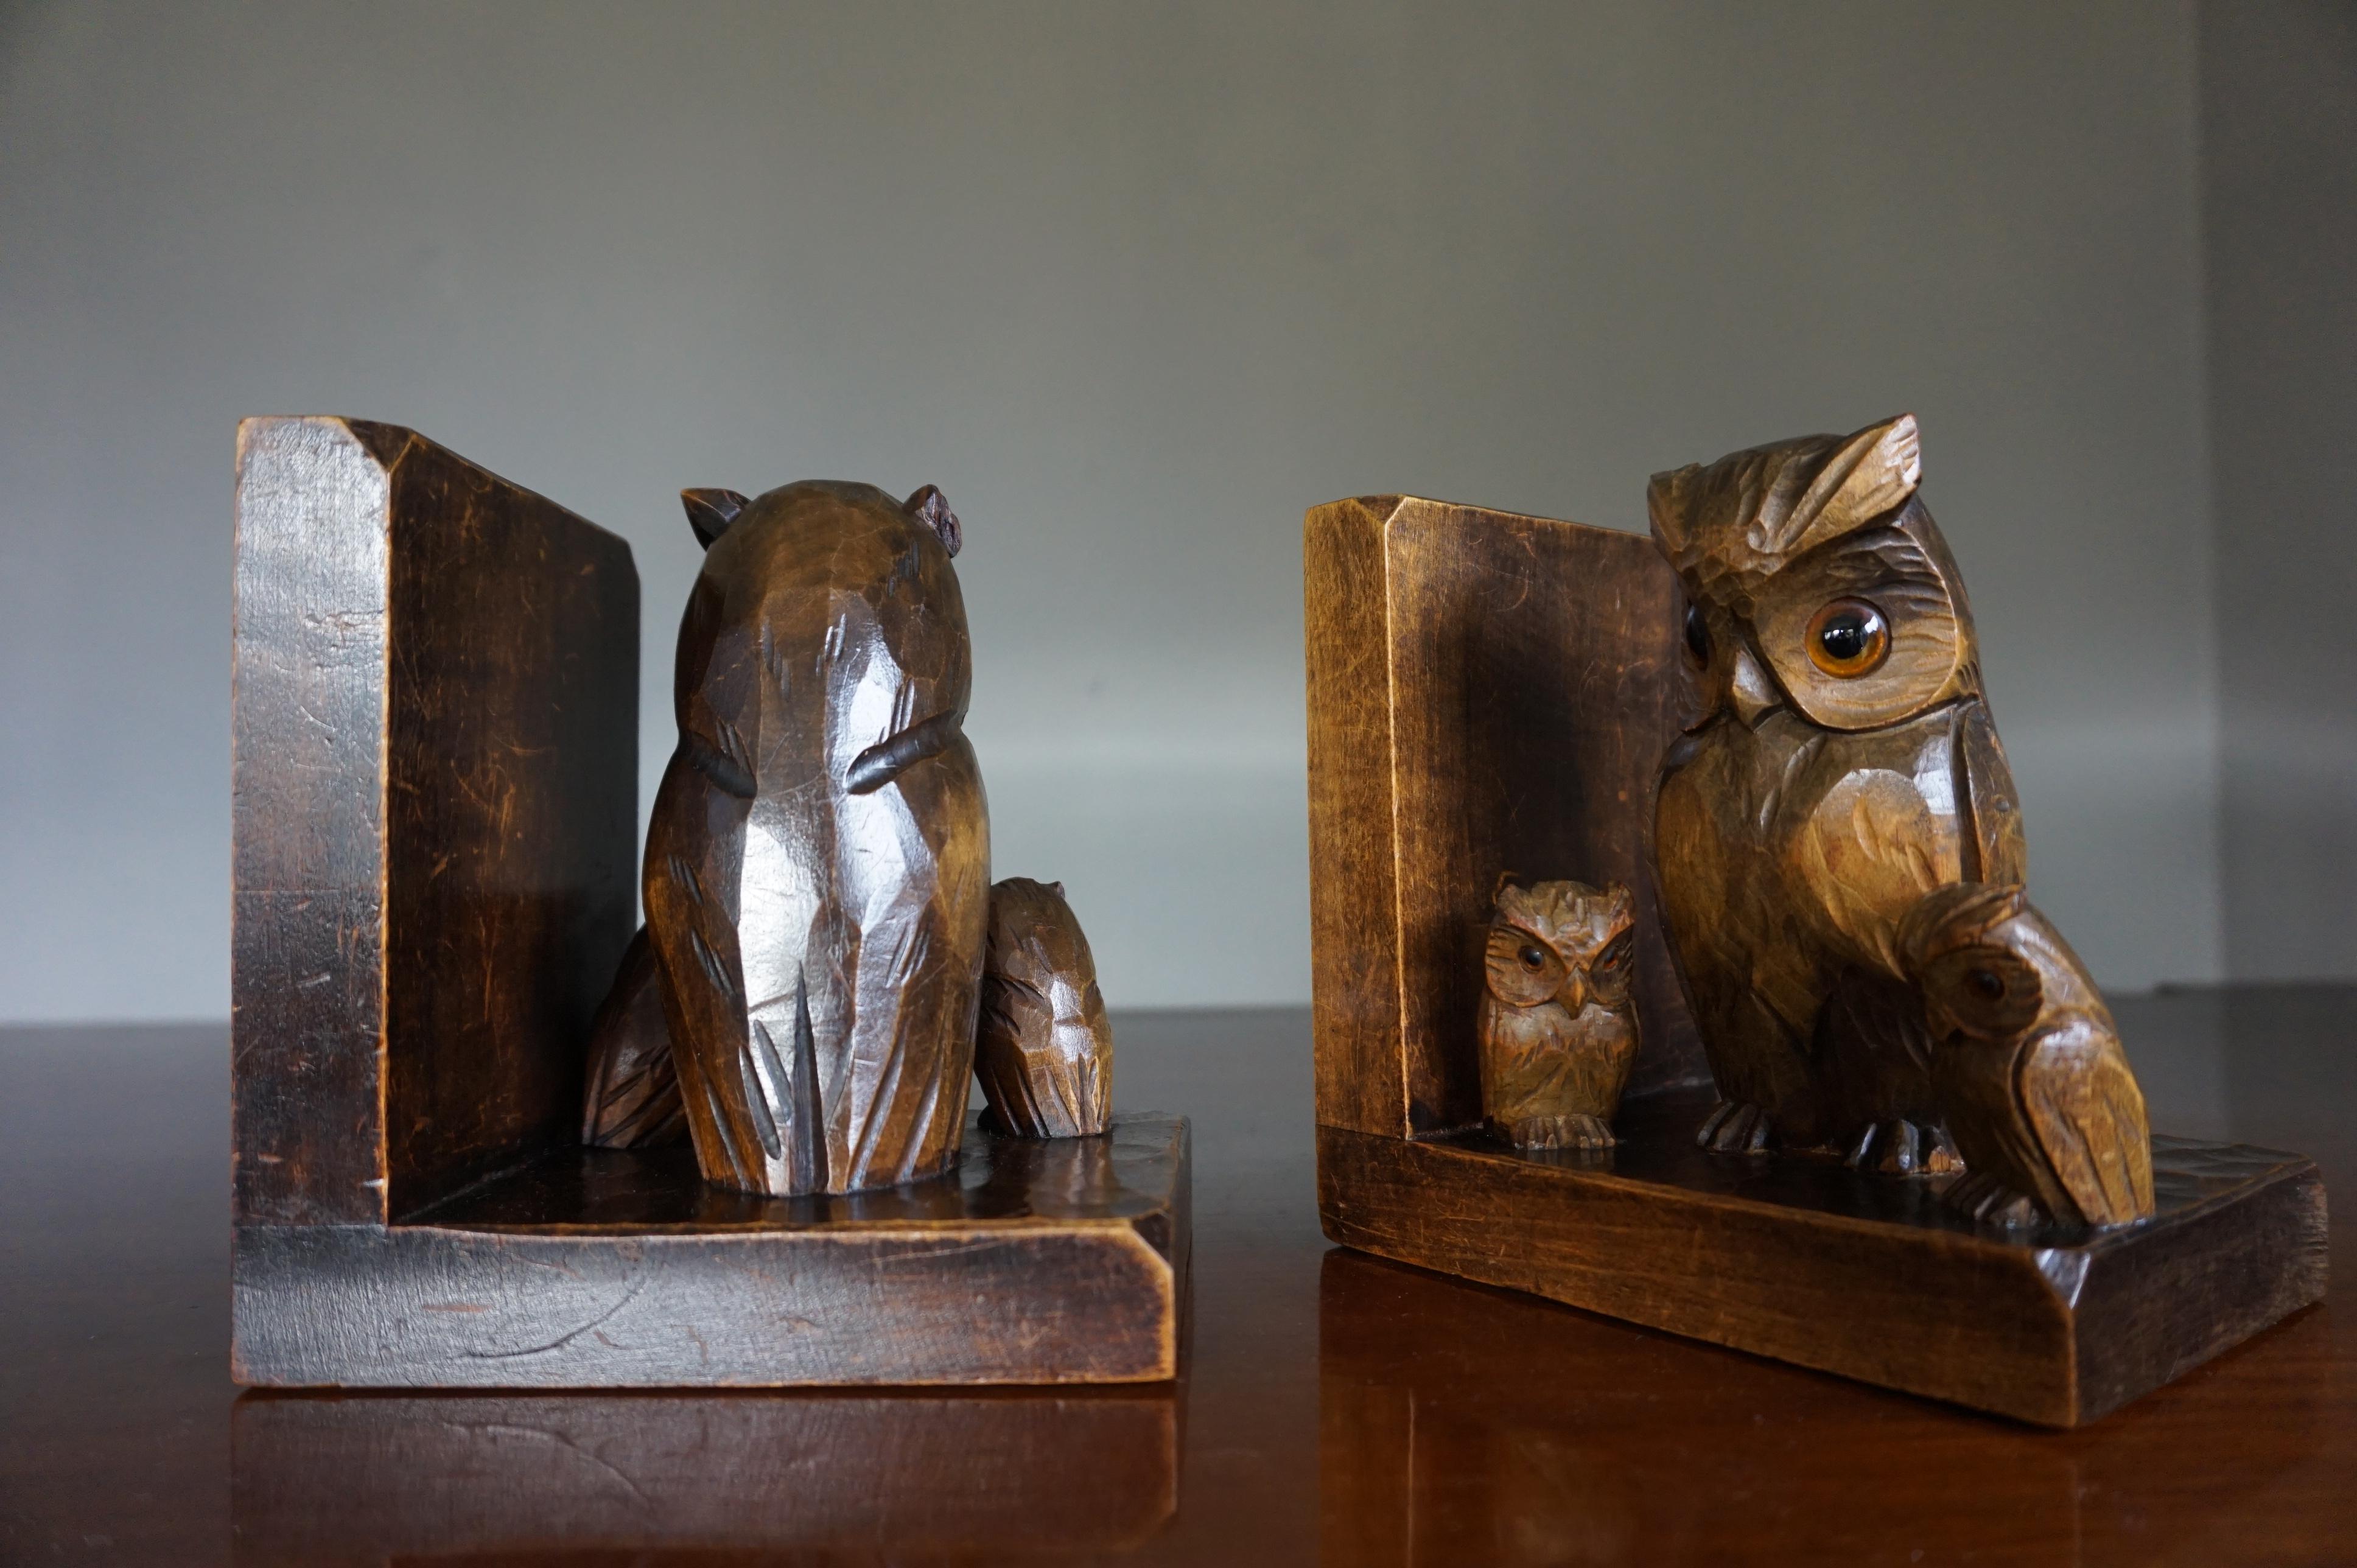 European Early 20th Century Art Deco Era Bookends W. Hand Carved Family of Owl Sculptures